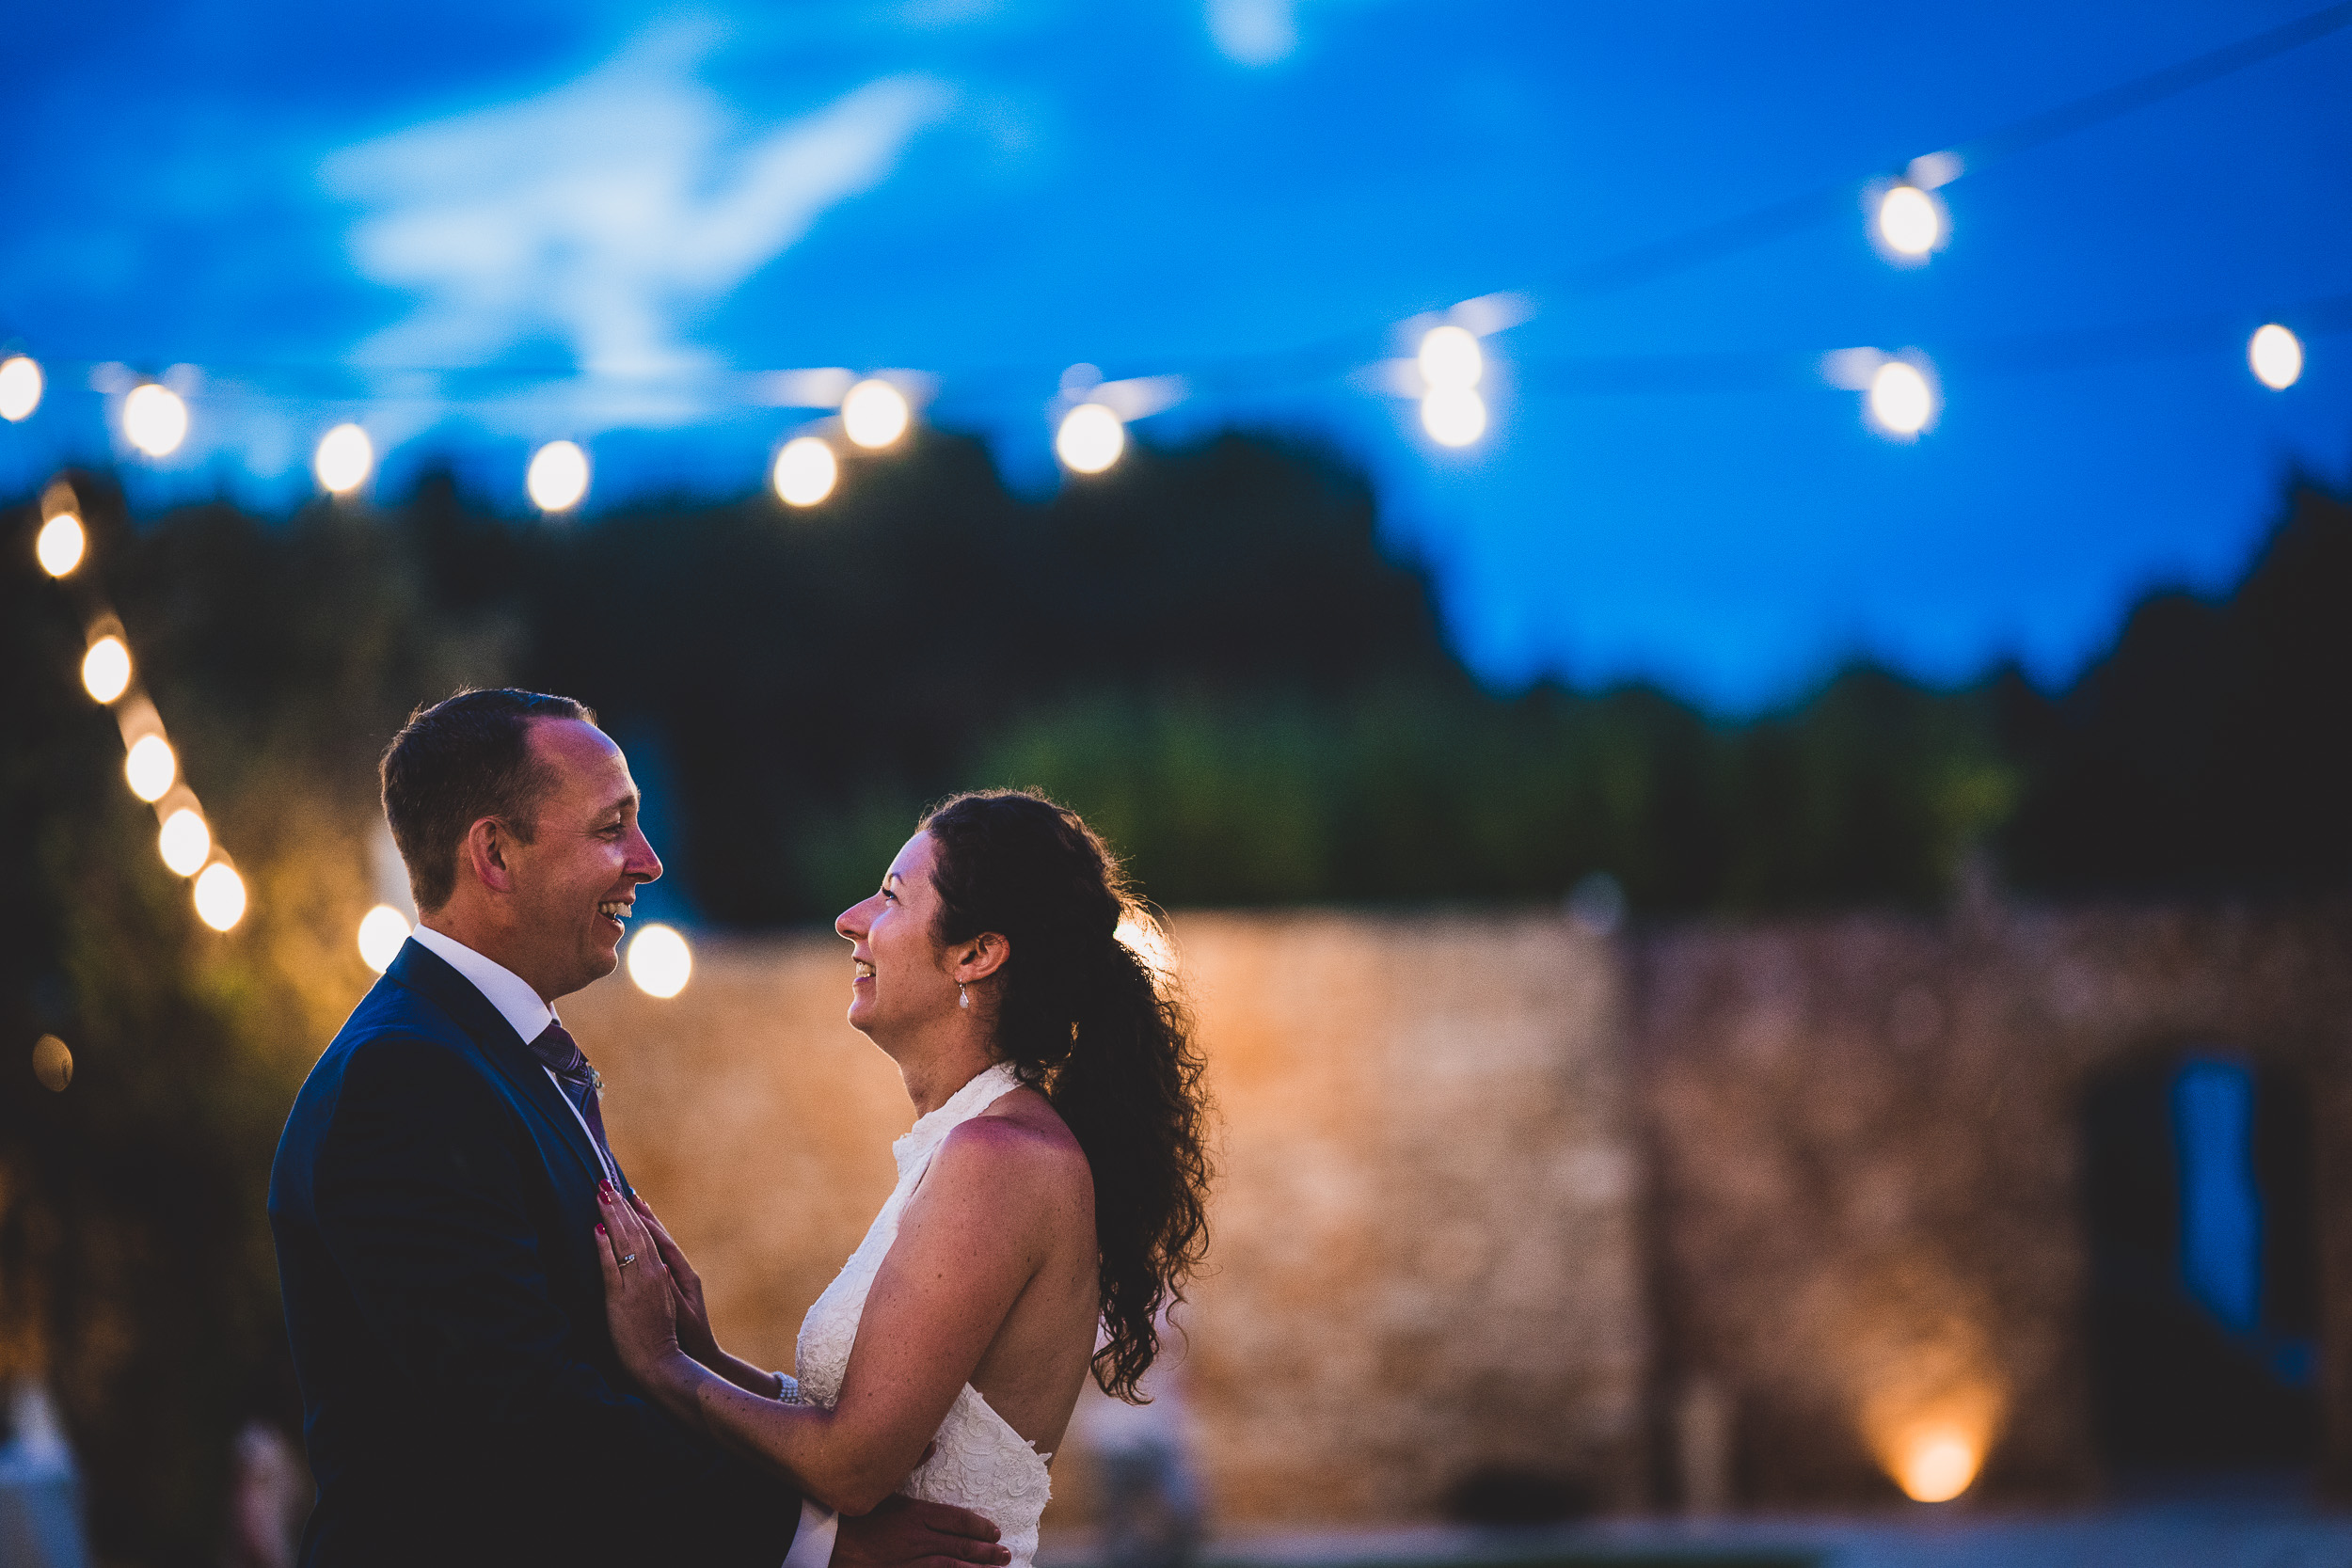 A groom and bride captured by a wedding photographer with a stunning string of lights in the background.